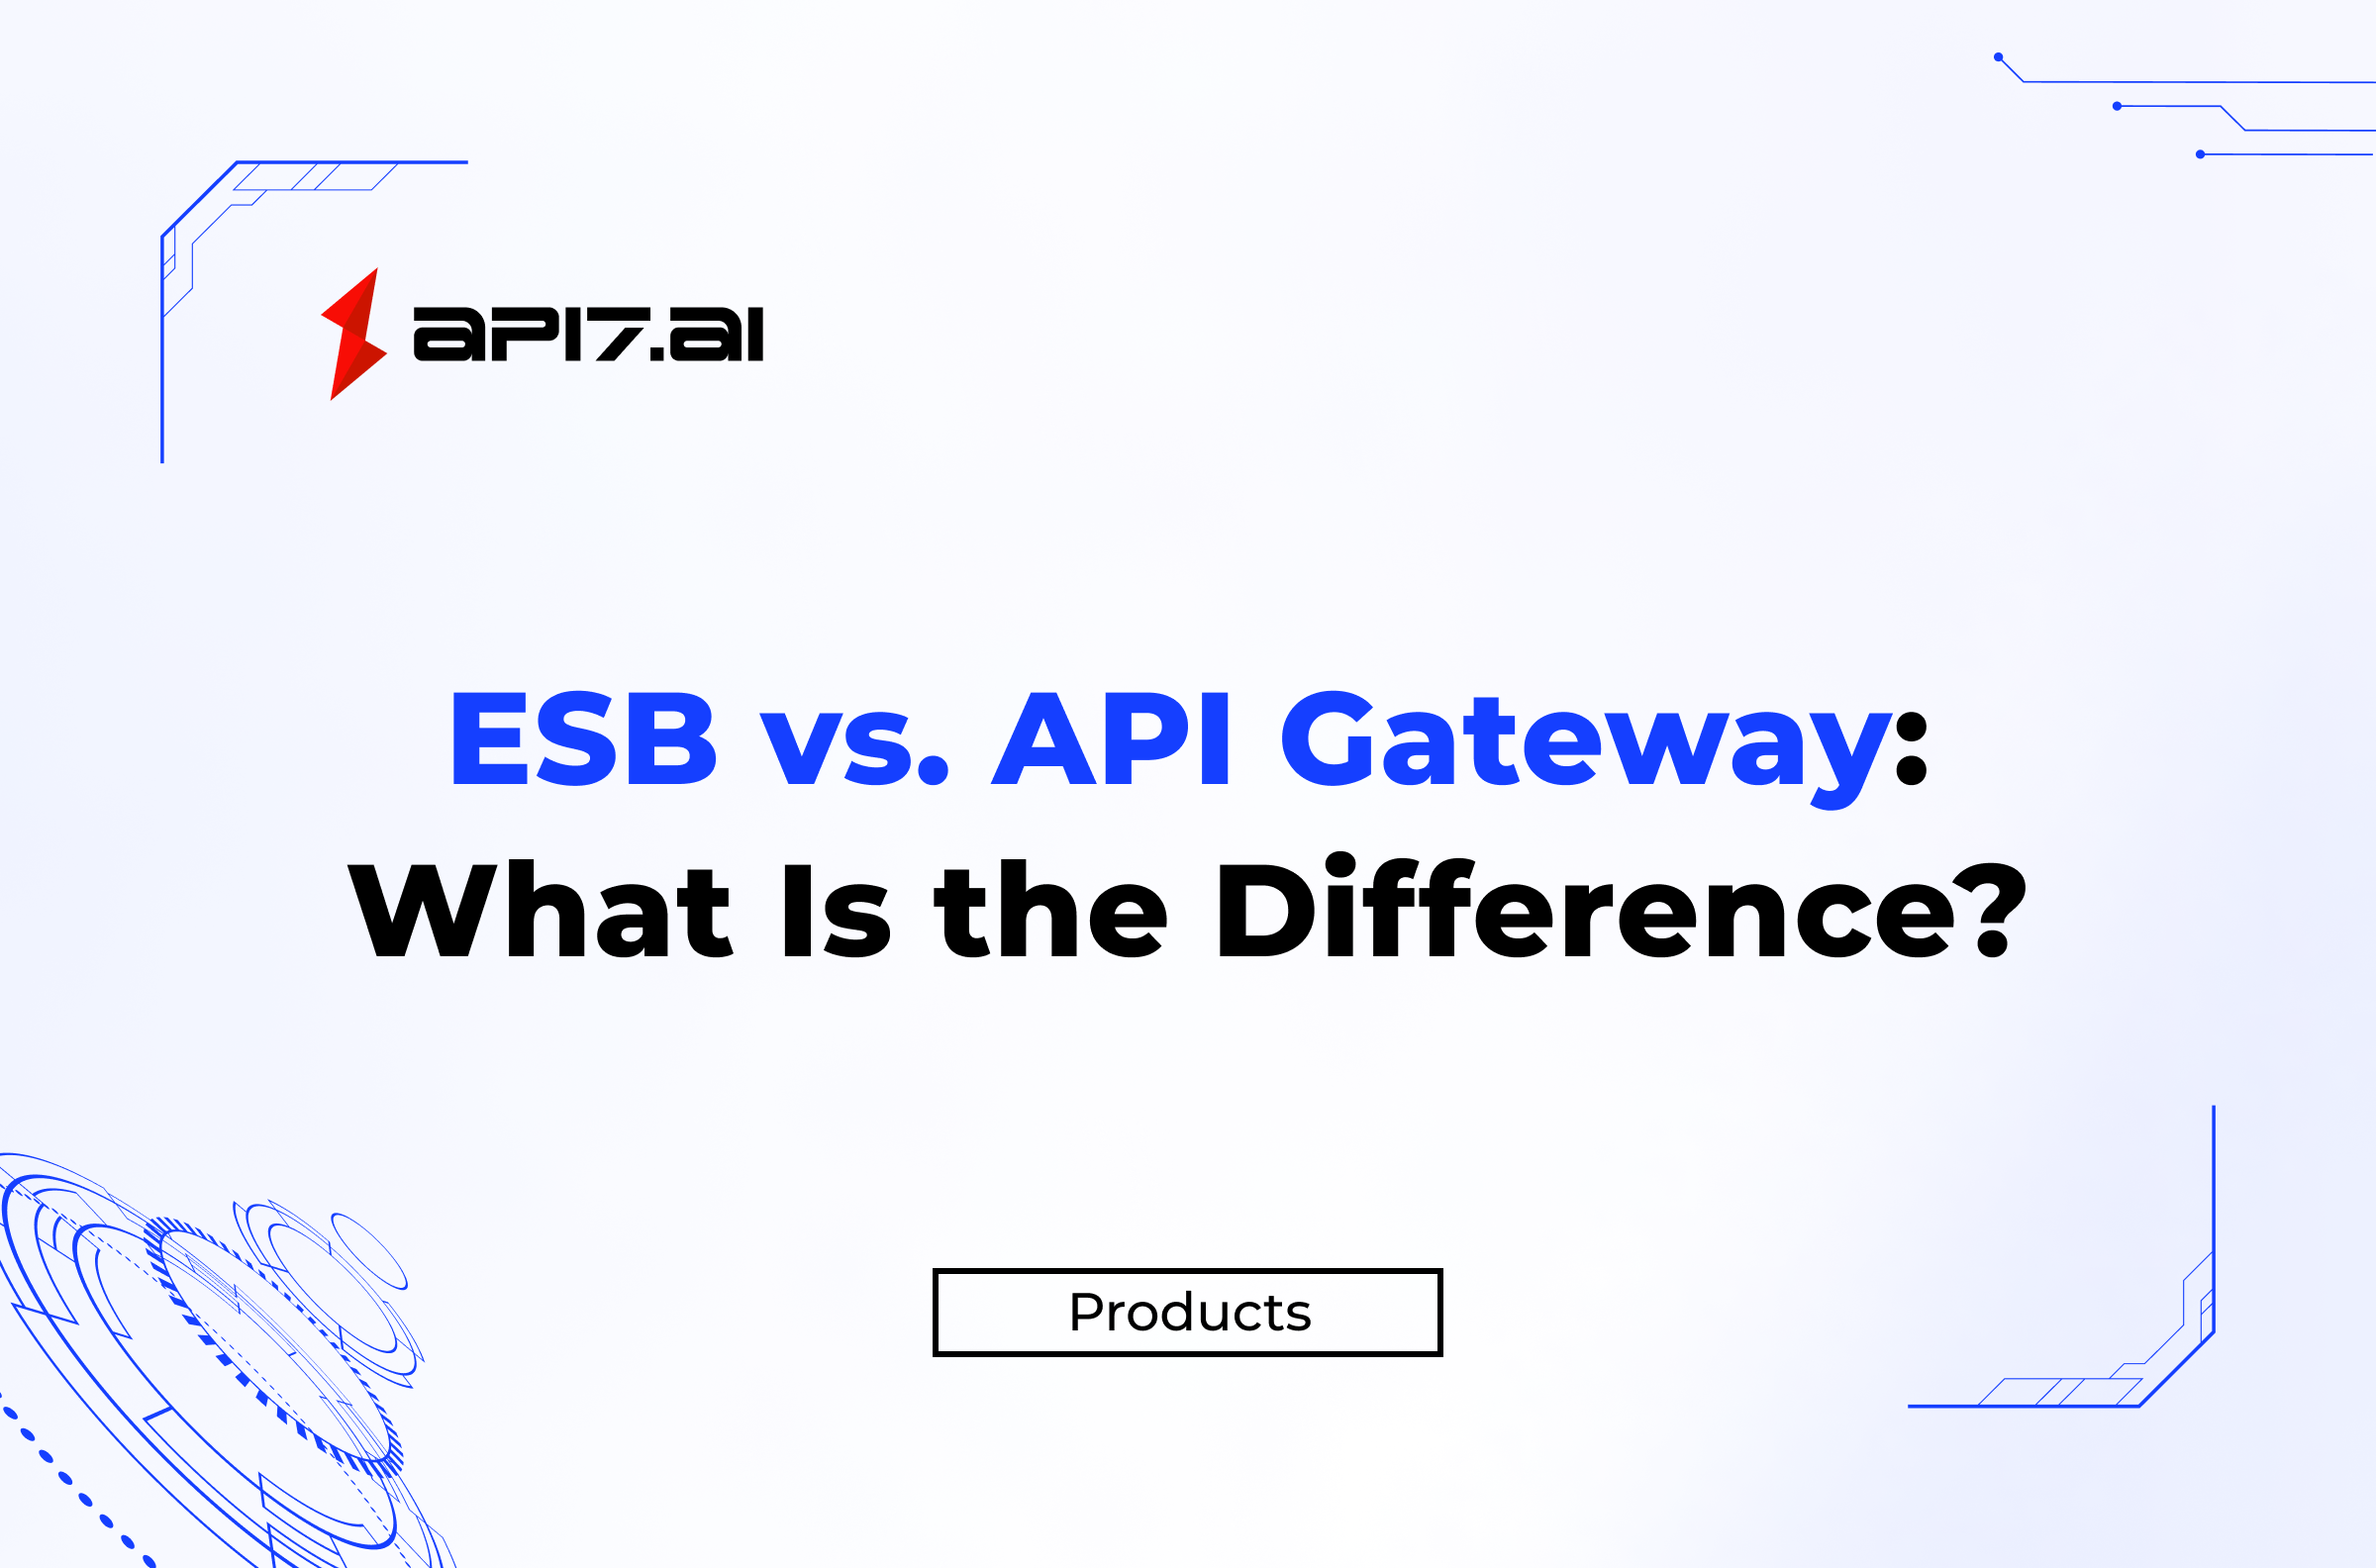 ESB vs. API Gateway: What Is the Difference?